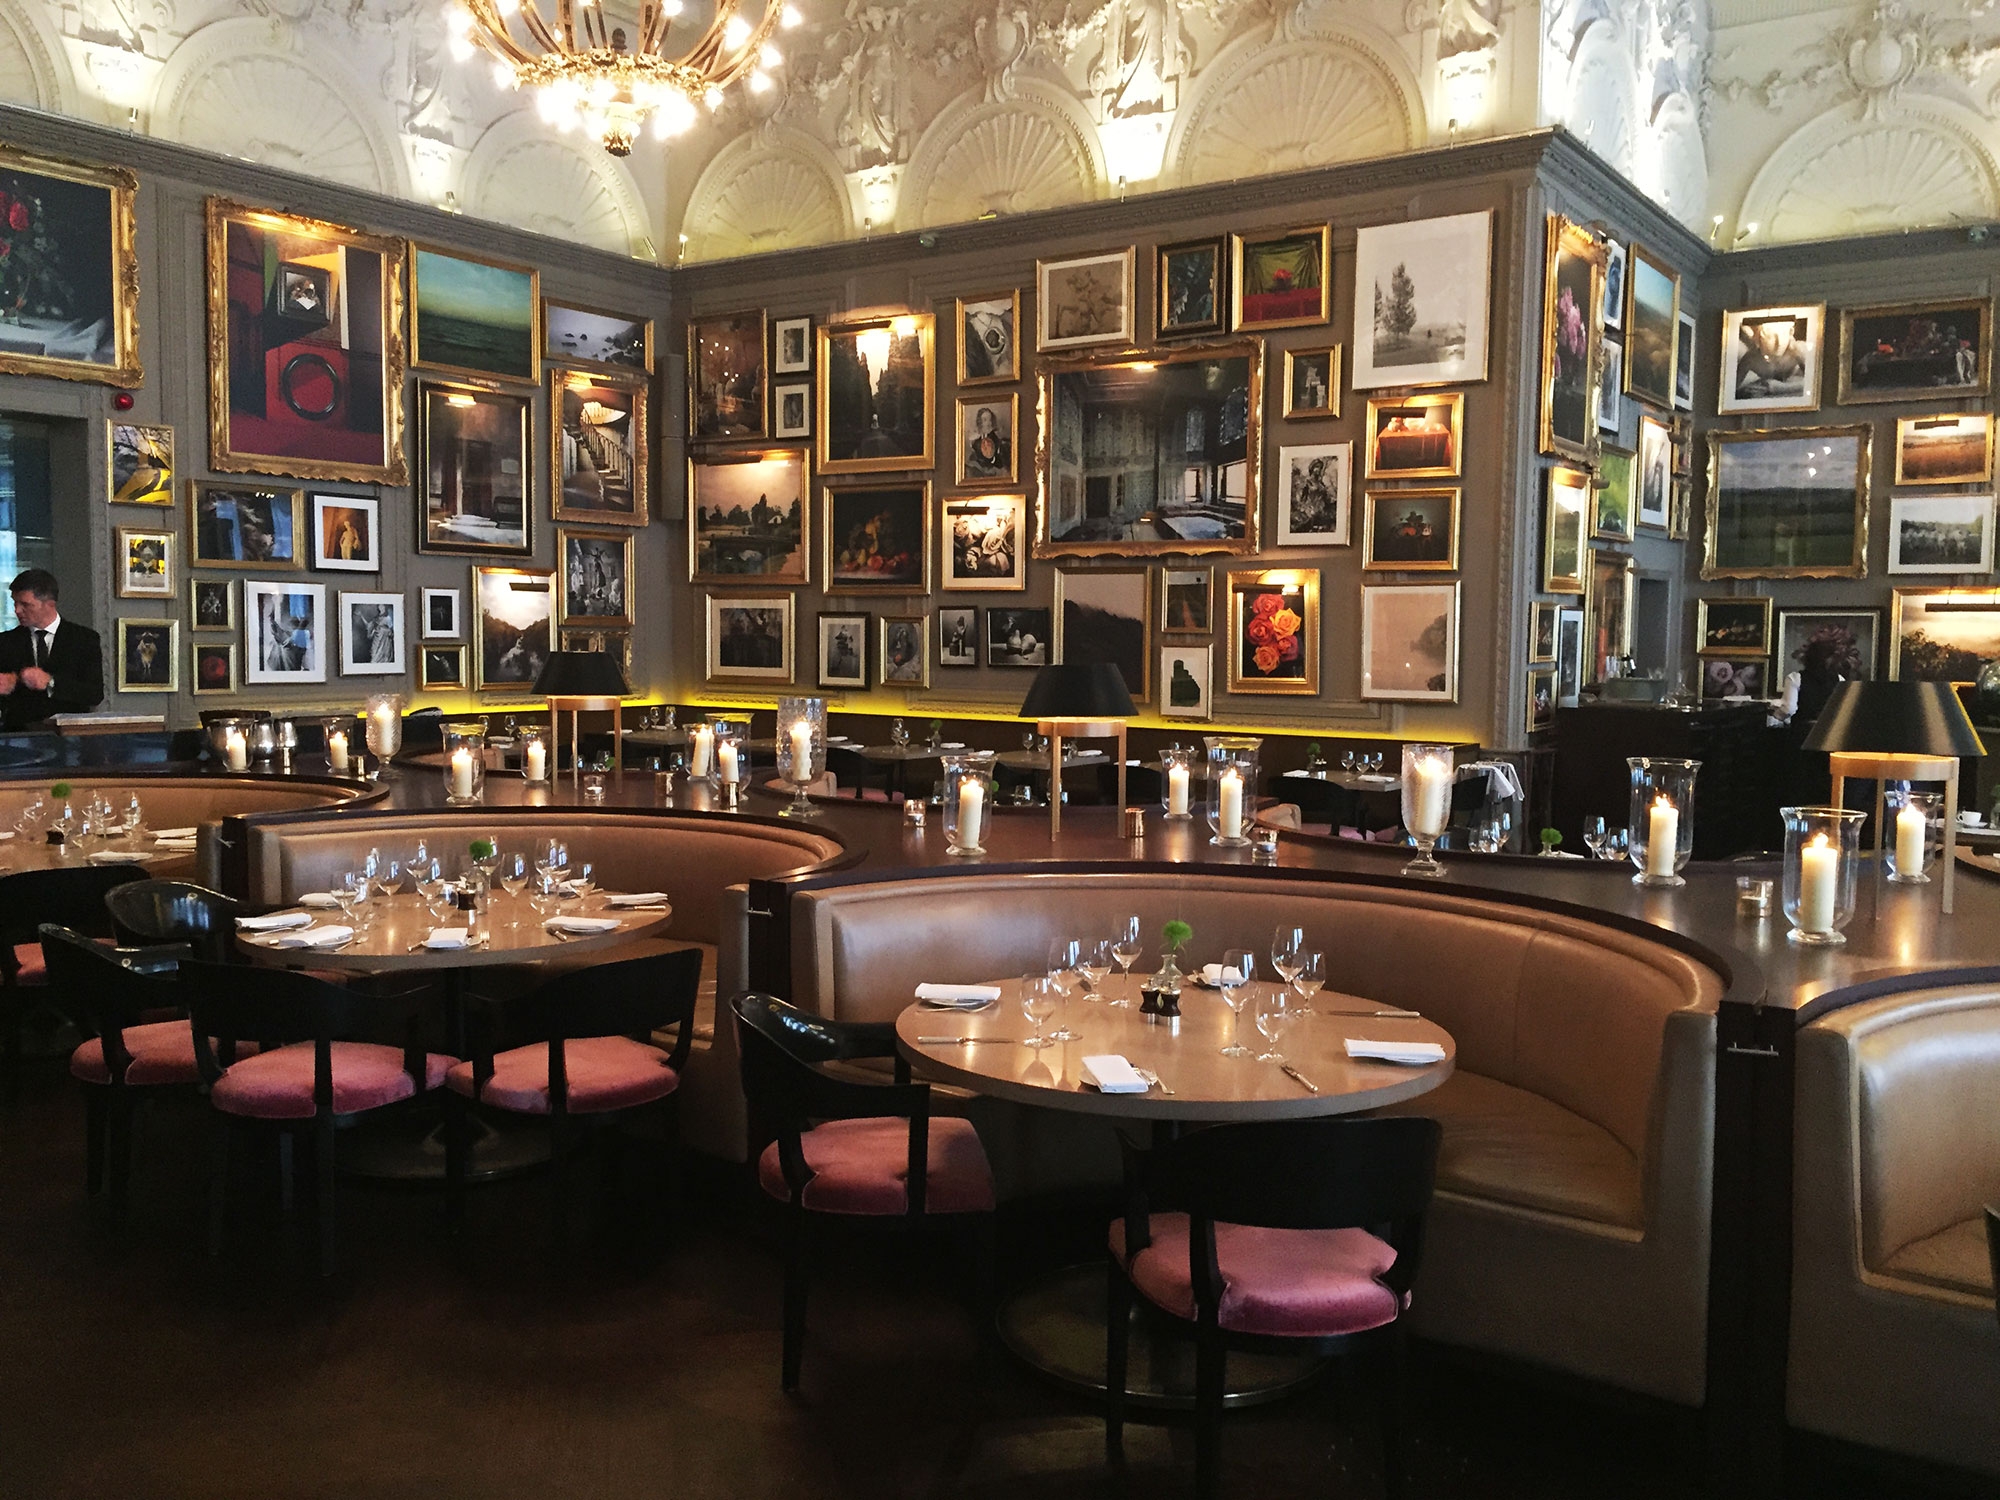 The interior of Berners Tavern contains framed pictures covering the walls and booth seating. June 2016